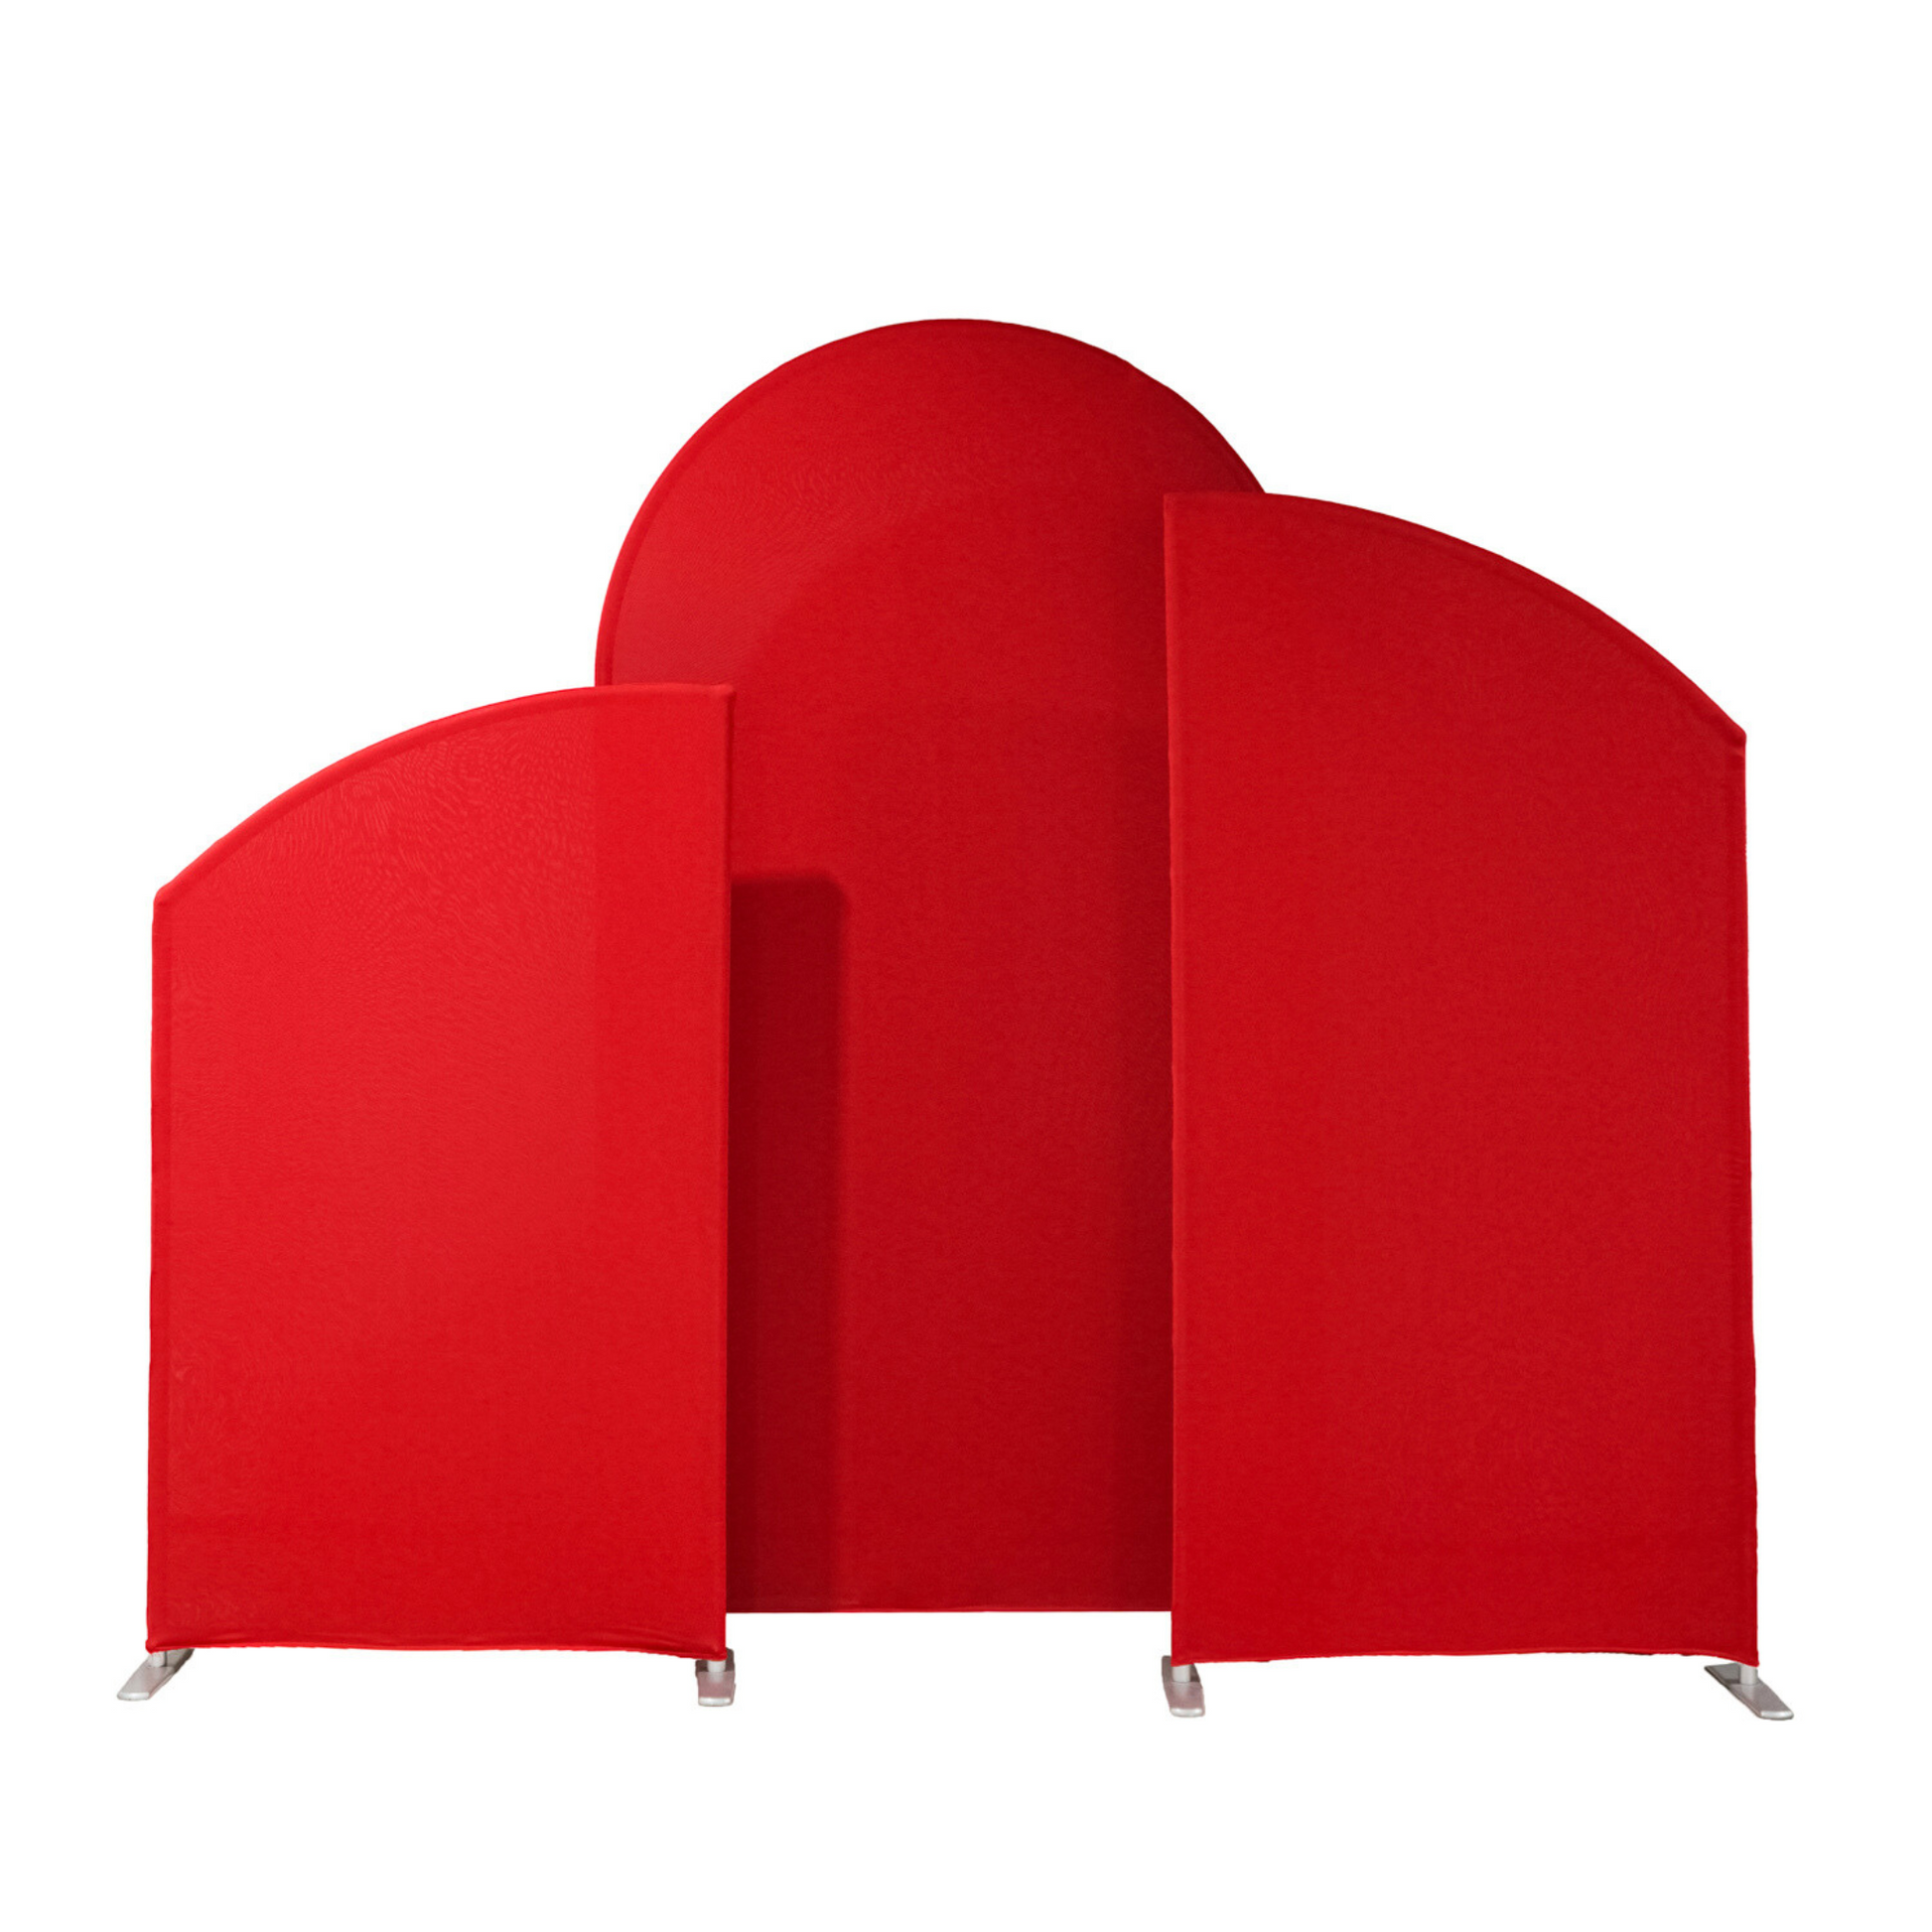 Spandex Arch Covers for Heavy Duty Chiara Frame Backdrop 3pc/set - Red